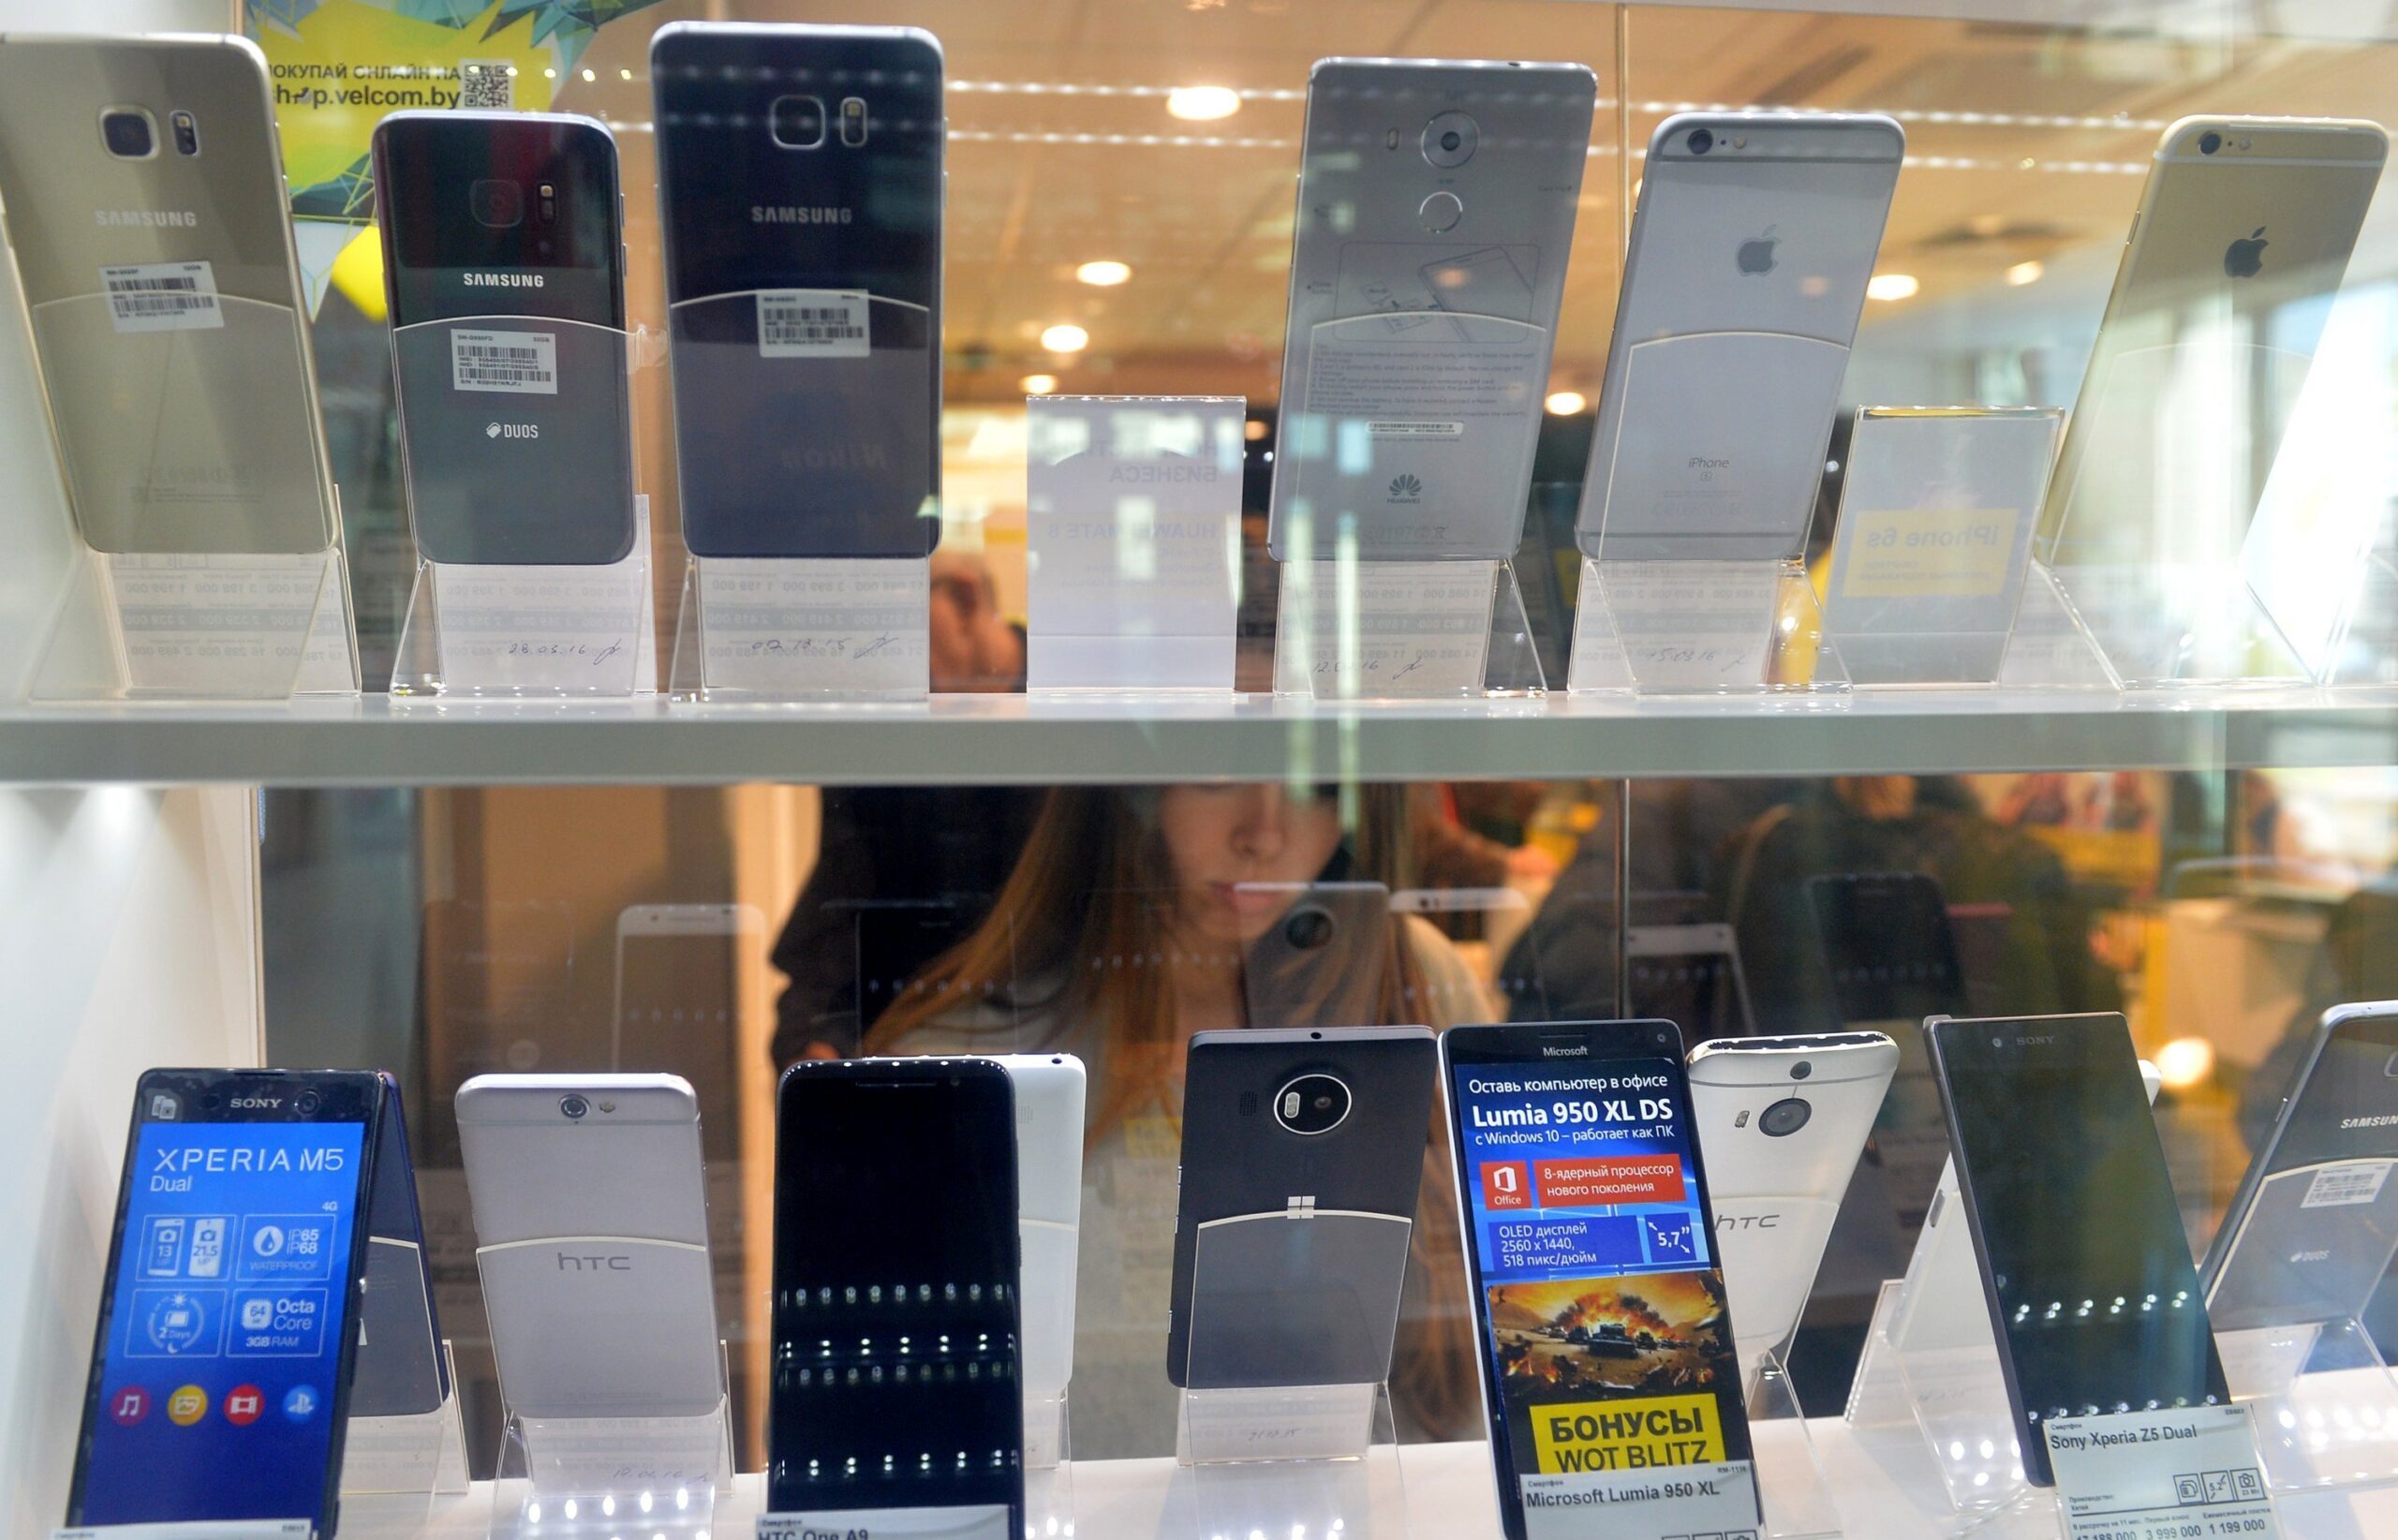 Refurbished mobile phones - the ultimate buying guide